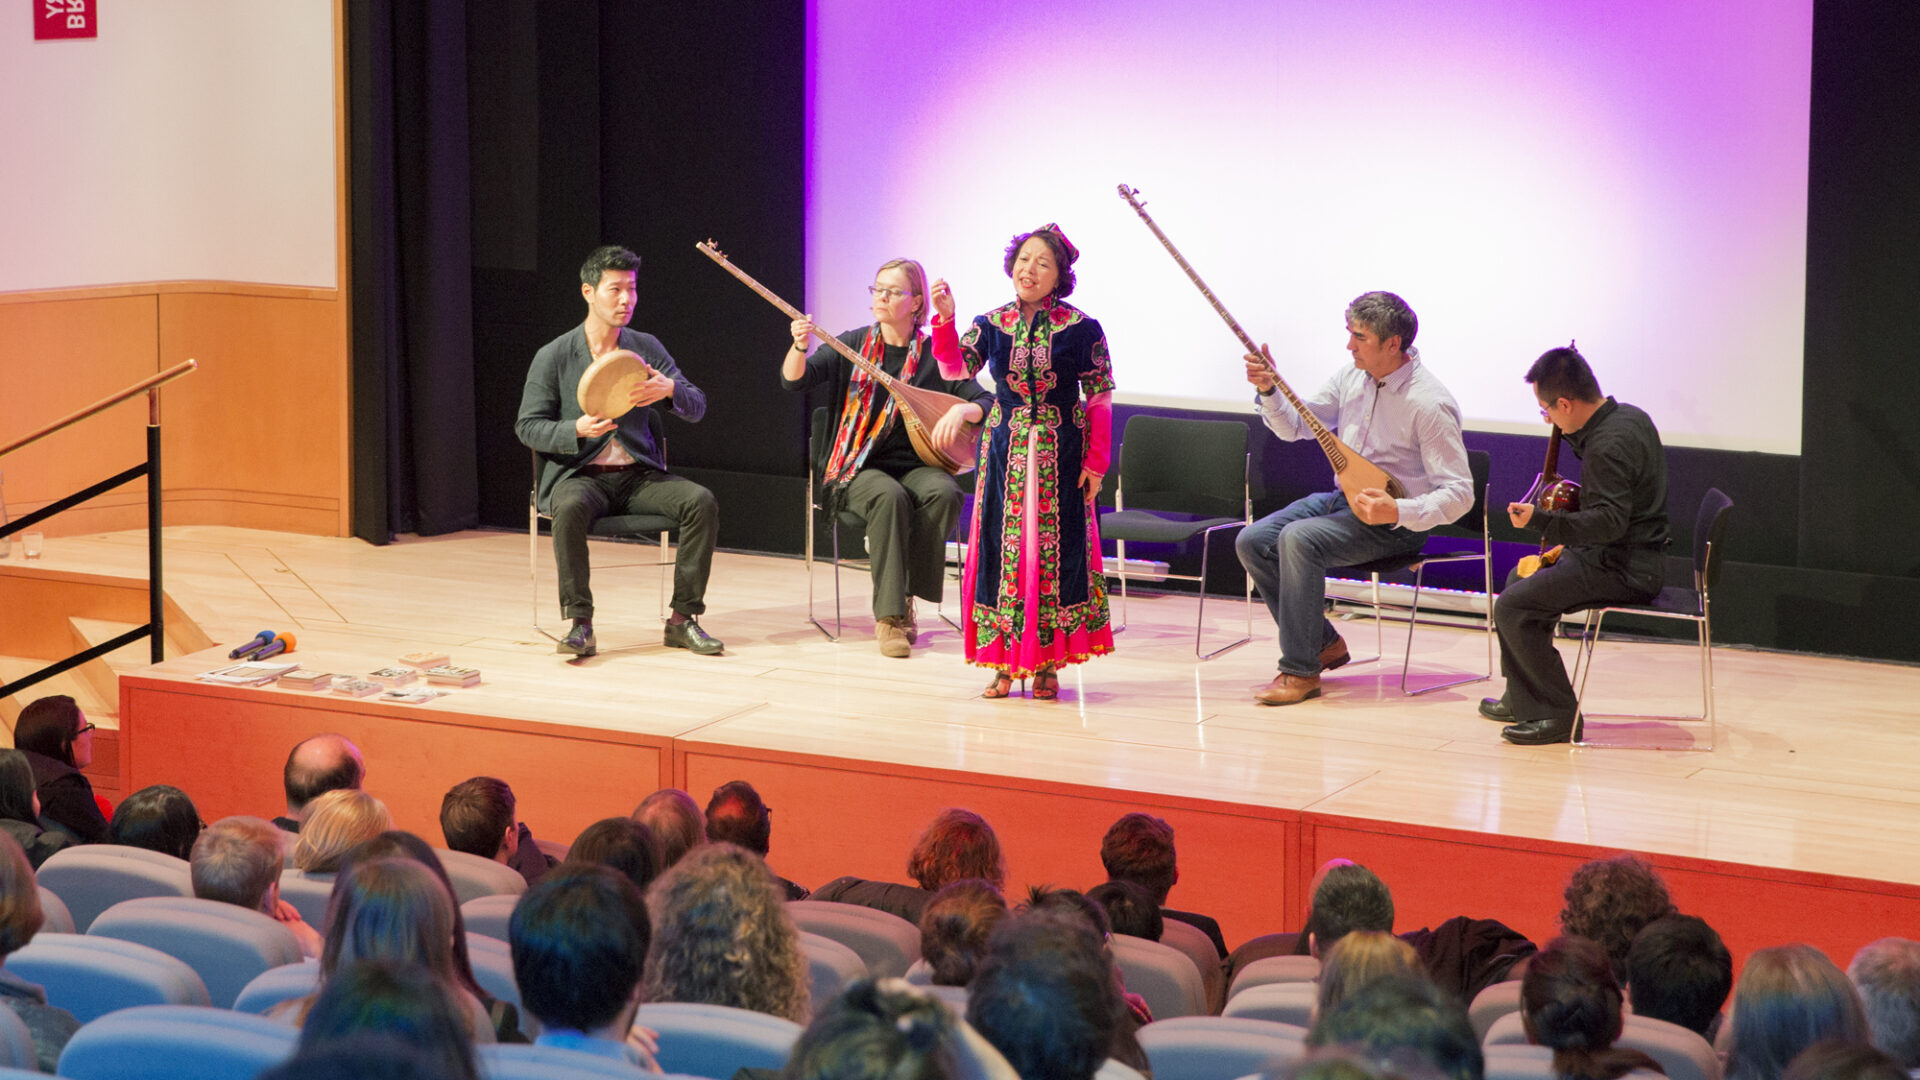 Photograph of a performance using traditional instruments on a stage in front of an audience.